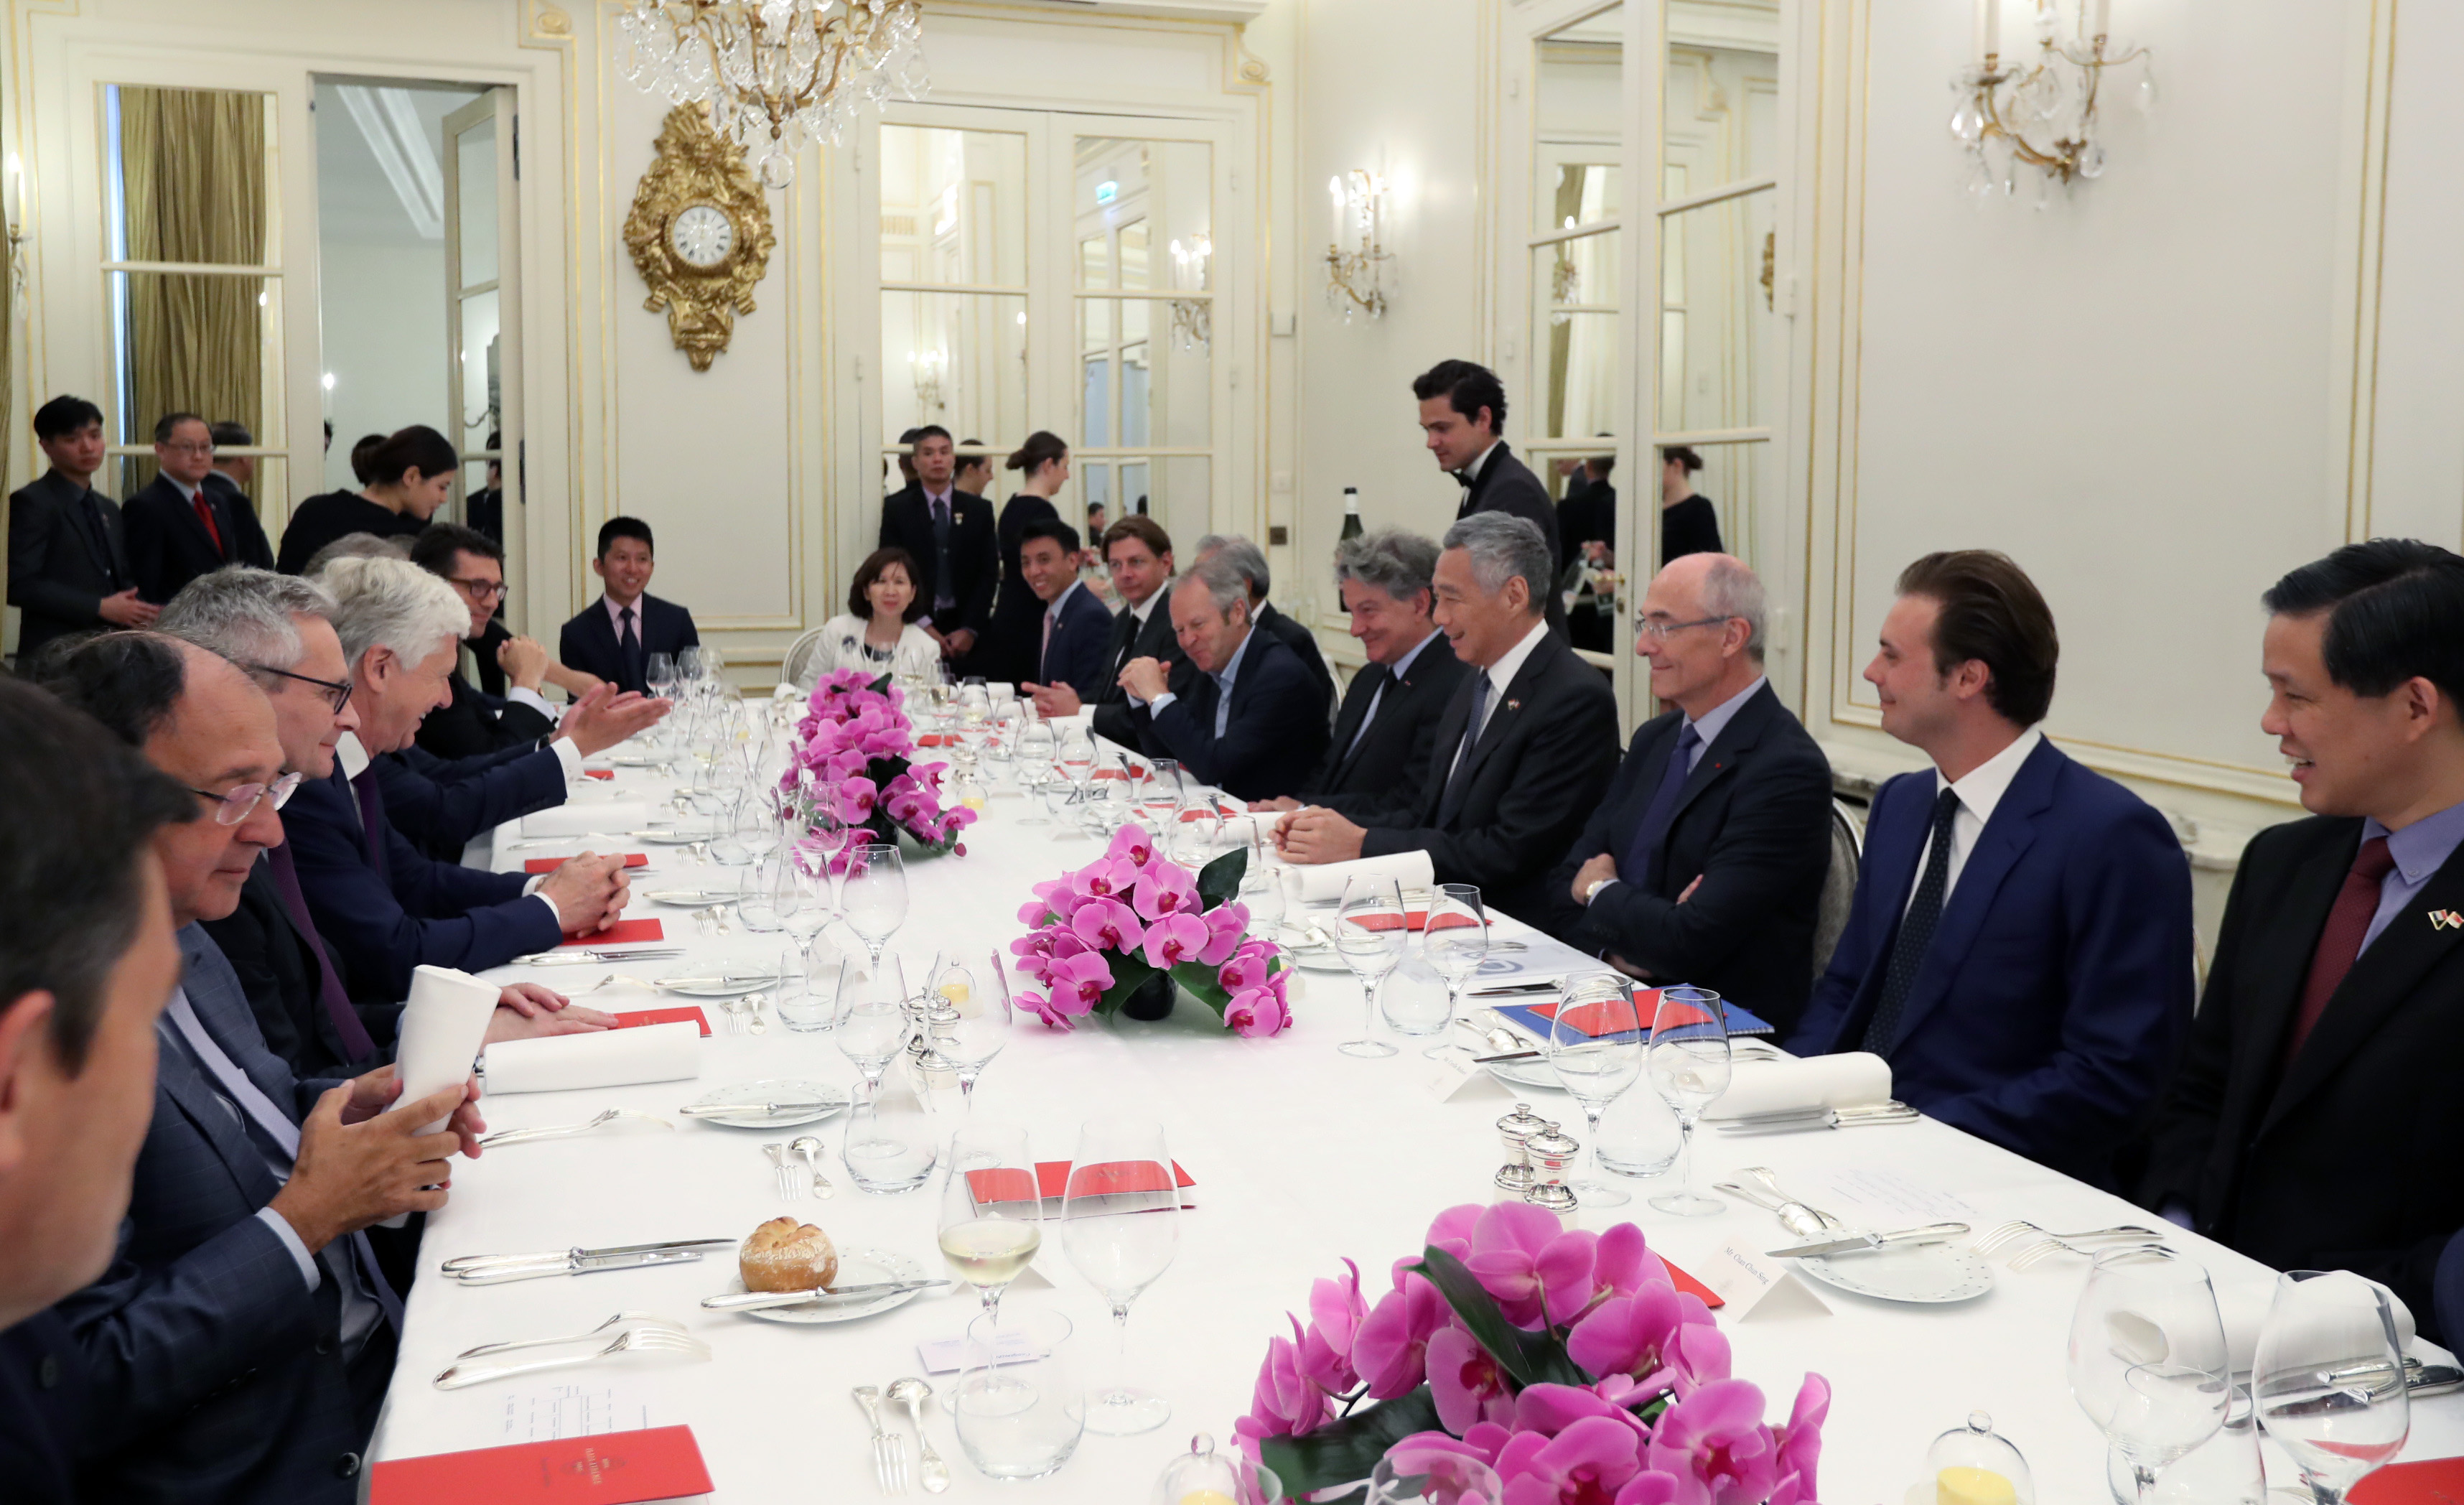 PM Lee Hsien Loong attending lunch with French industry leaders on 13 Jul 2018 (MCI Photo Fyrol)